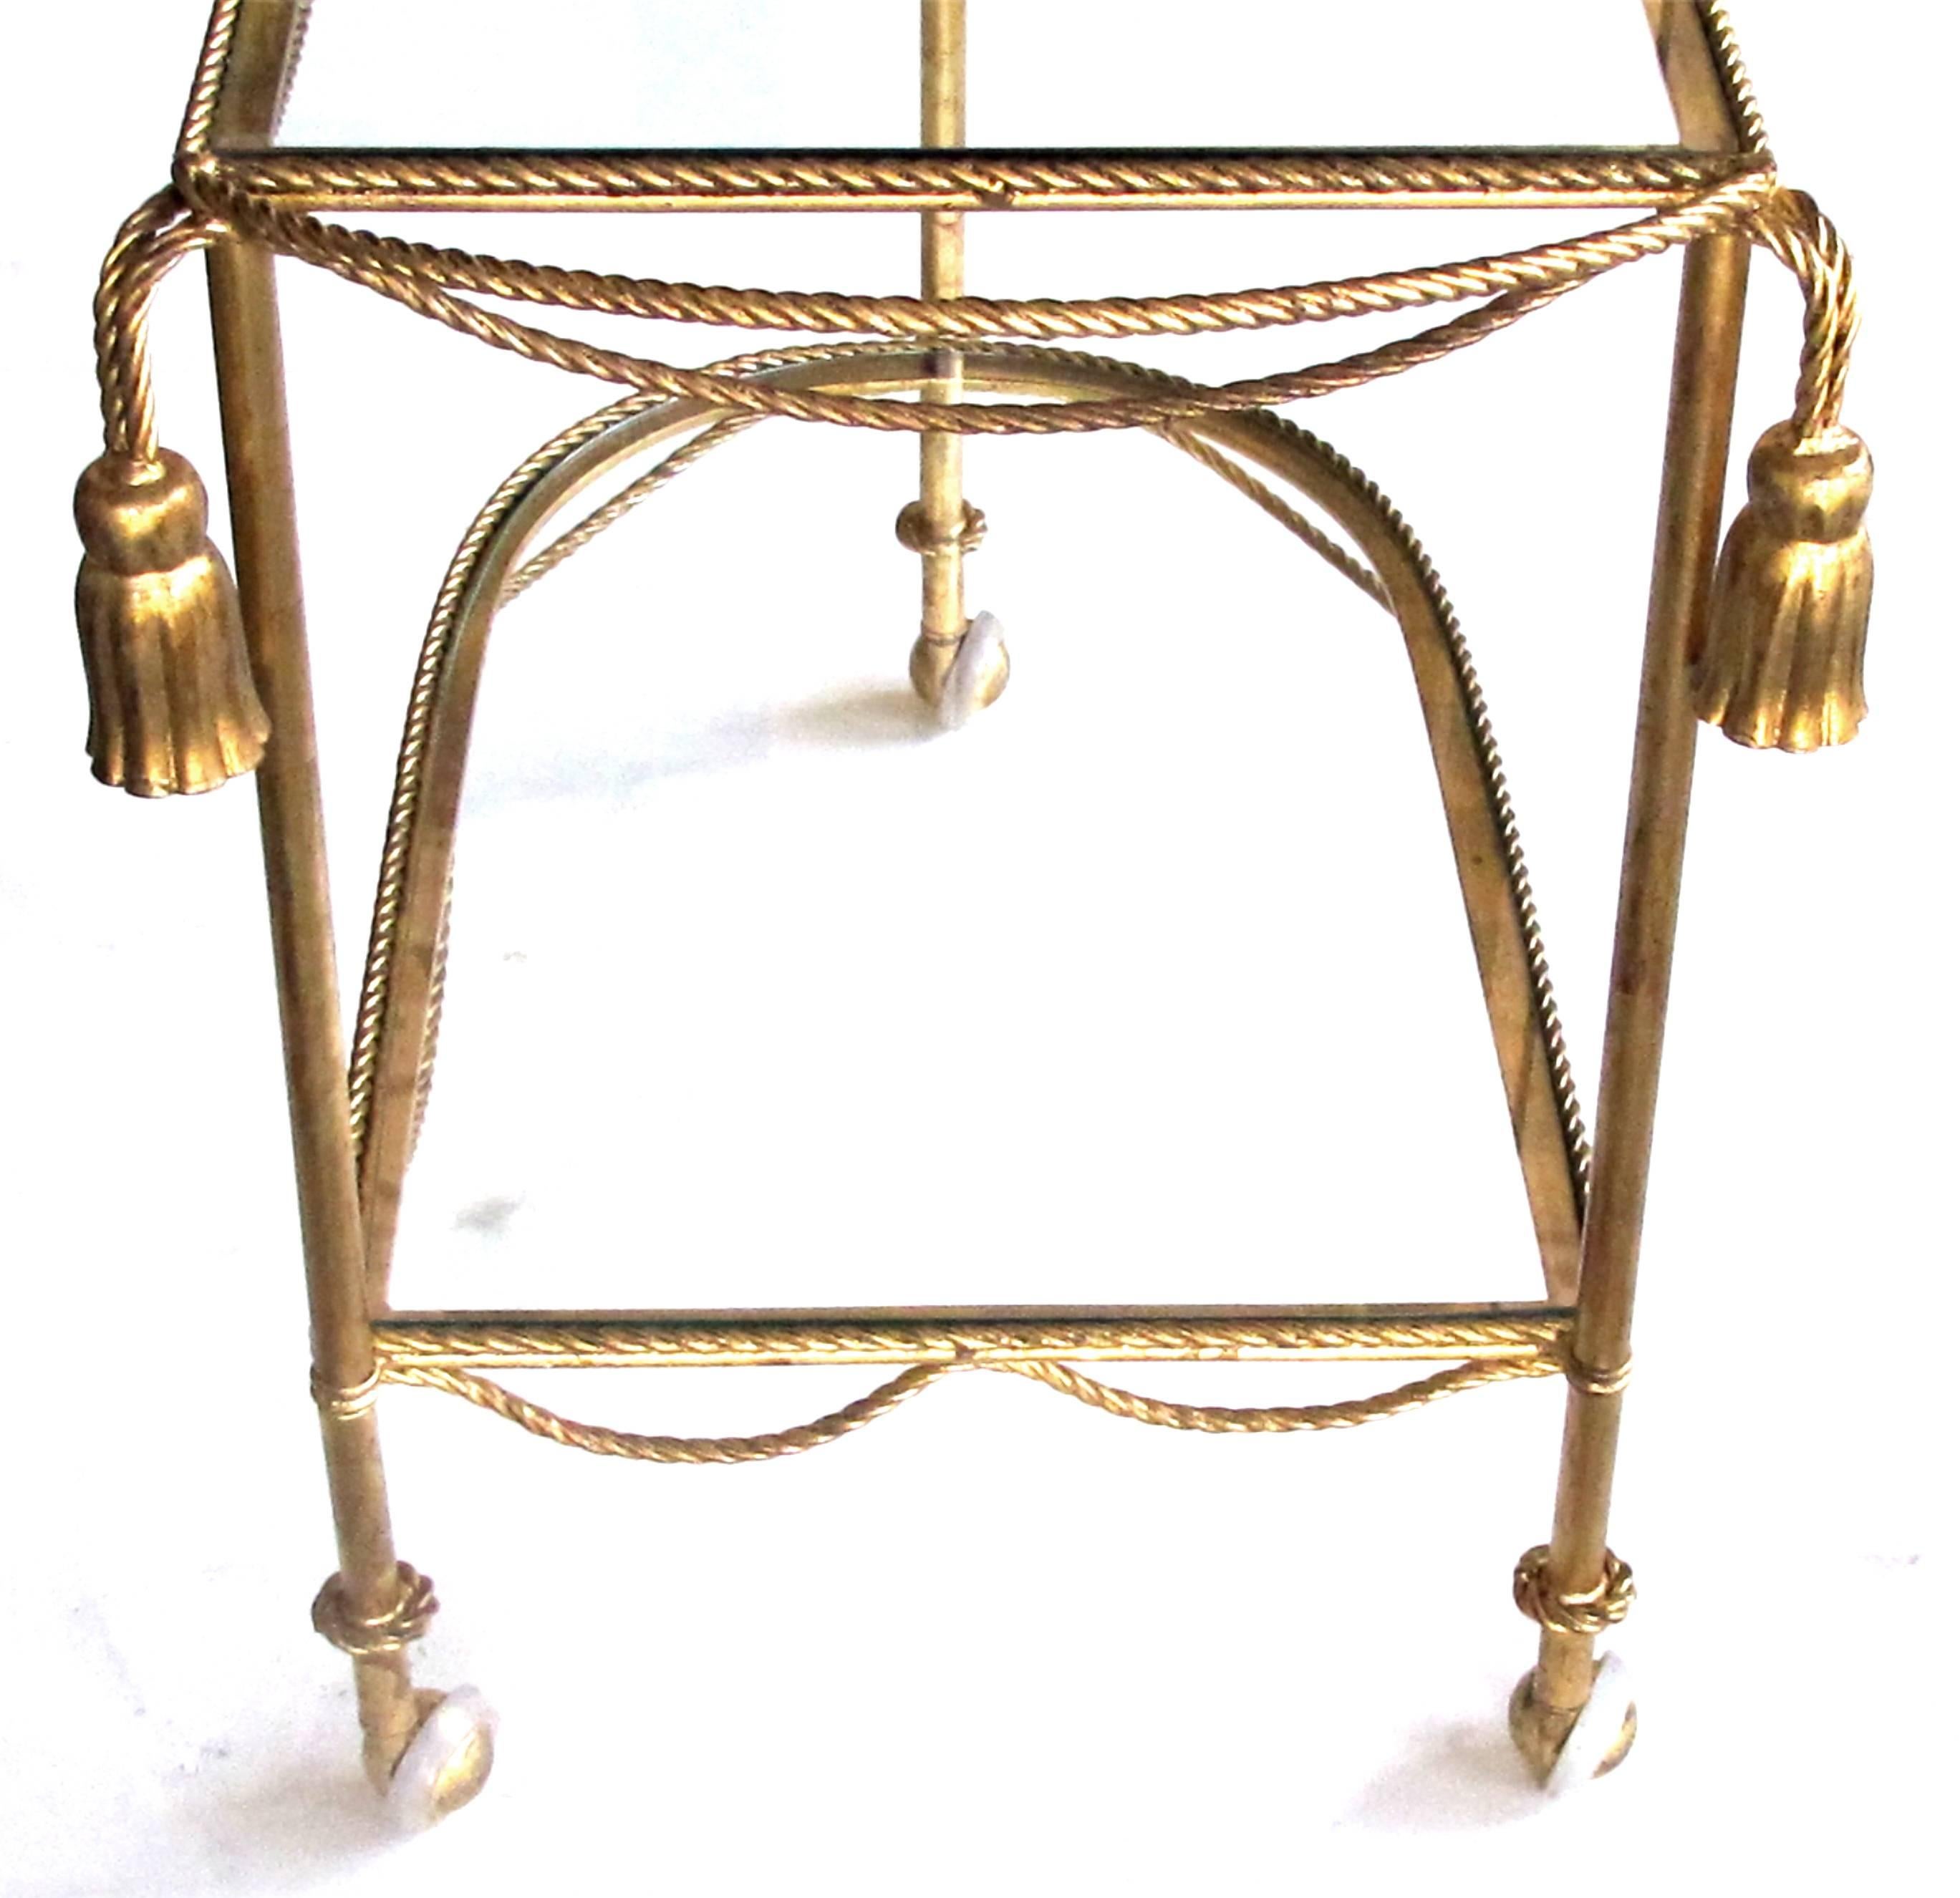 Chic Pair of Italian Hollywood Regency Gilt-Tole Drinks Carts with Glass Shelves 1